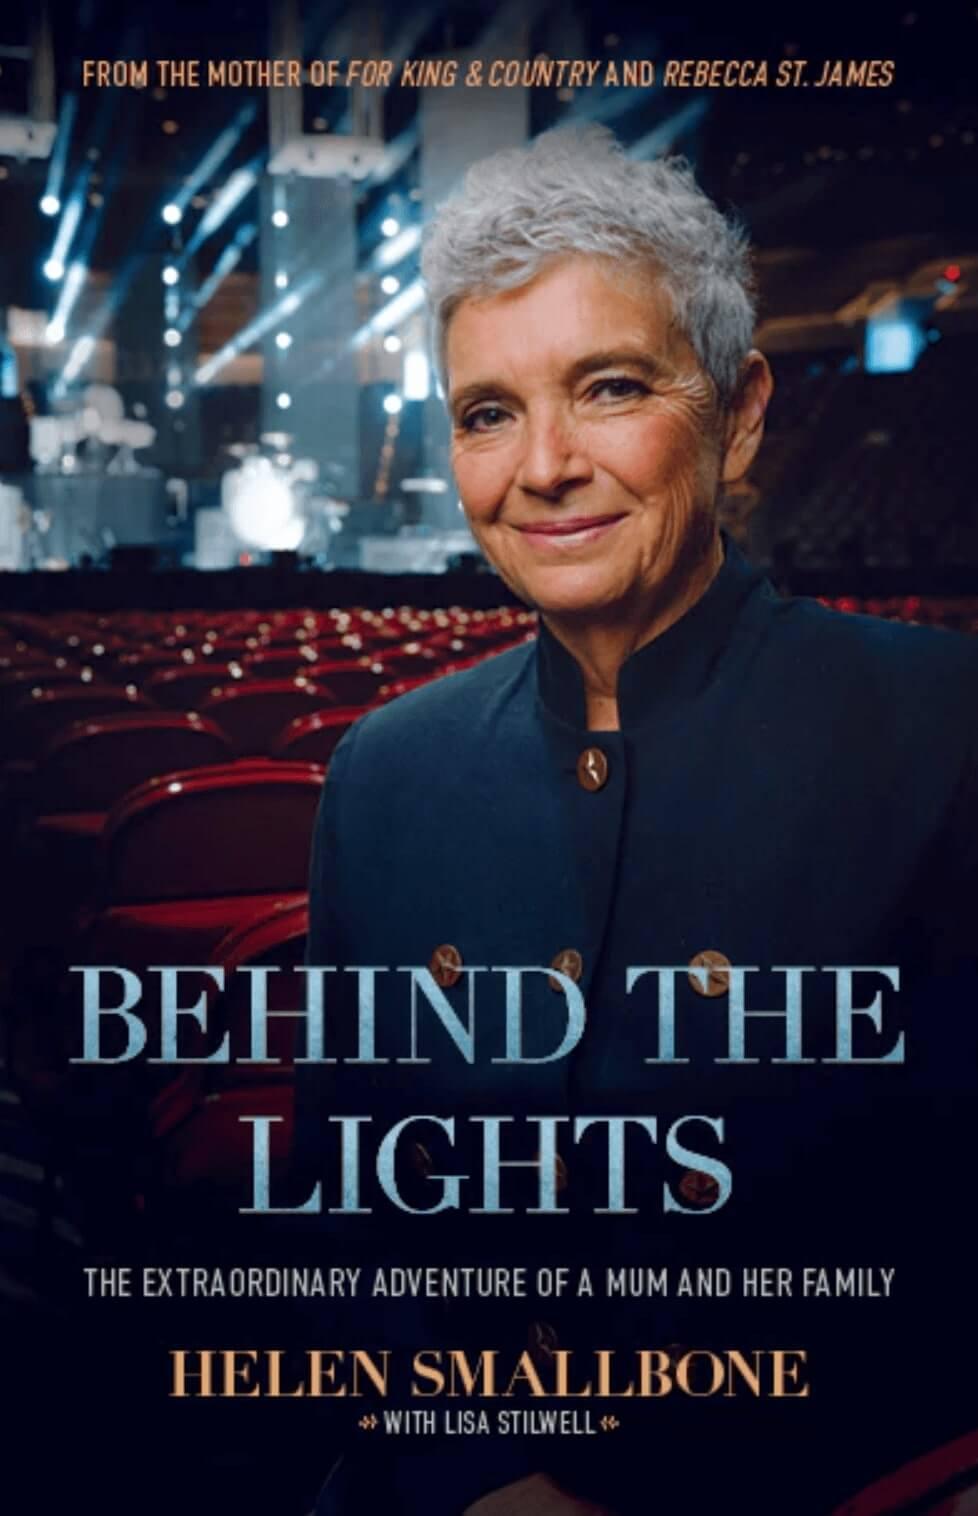 Cover of the book "Behind the Lights: The Extraordinary Adventure of a Mum and Her Family"